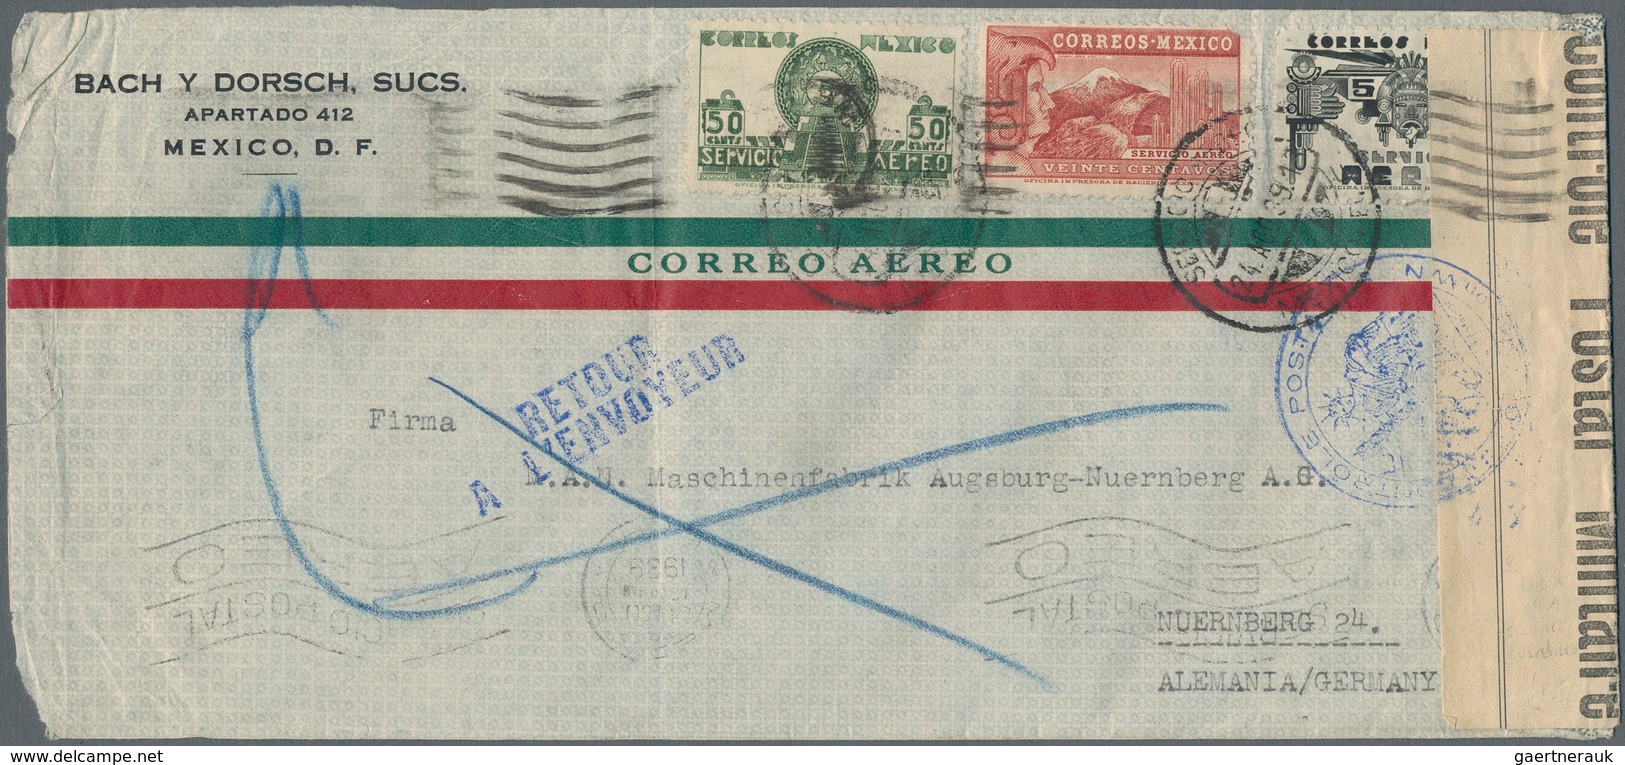 Mexiko: 1939, Airmail Cover From "MEXICO 24.AUG 39" To Nuremberg/Germany. The Airmail Route To Germa - Mexico